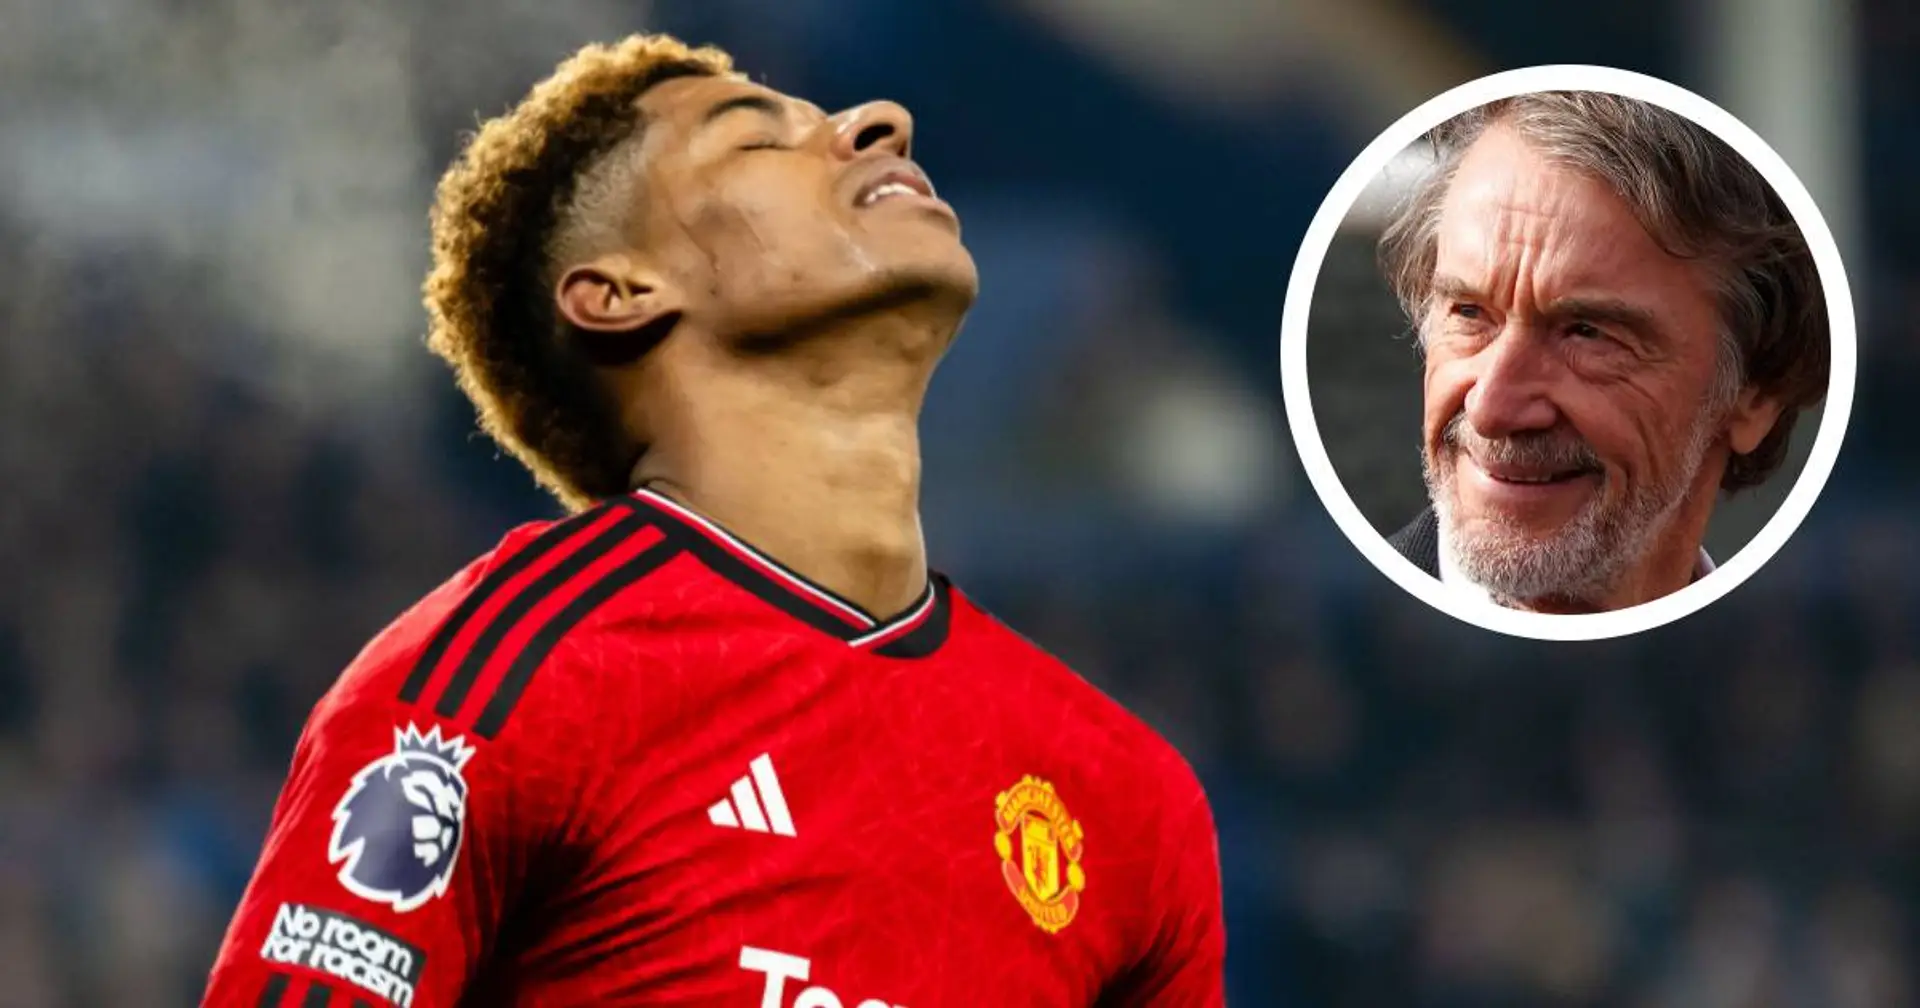 Sir Jim Ratcliffe's stance on selling Marcus Rashford this summer (reliability: 3 stars)